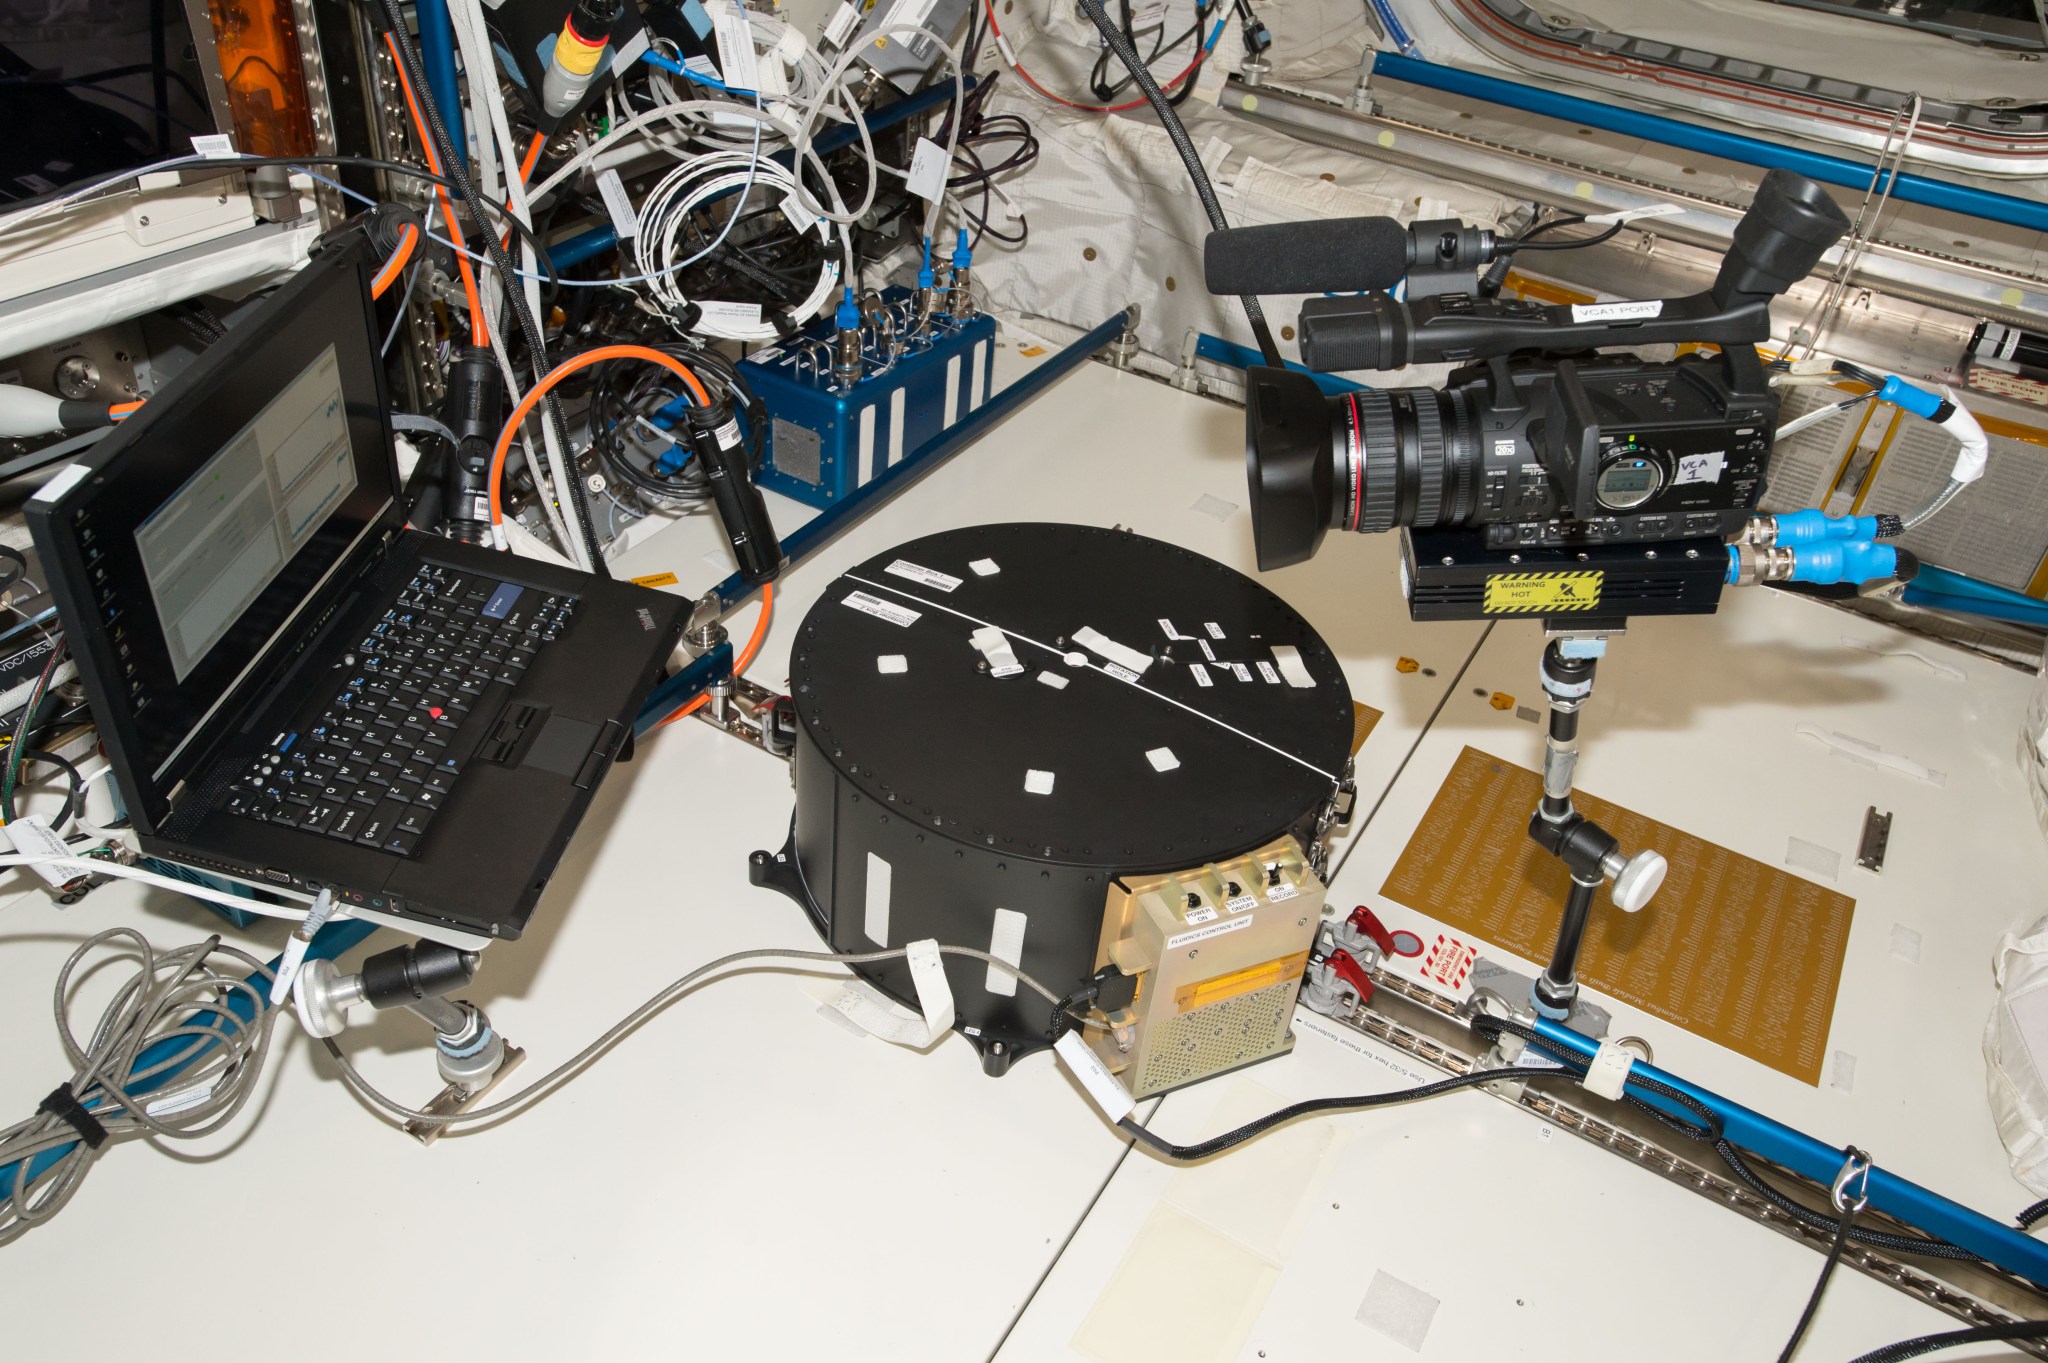 image of the hardware set-up for the ESA FLUIDICS investigation, which evaluates sloshing, turbulence, and other behaviors of liquid in a sphere in microgravity and could support improvements in fuel management of satellites.